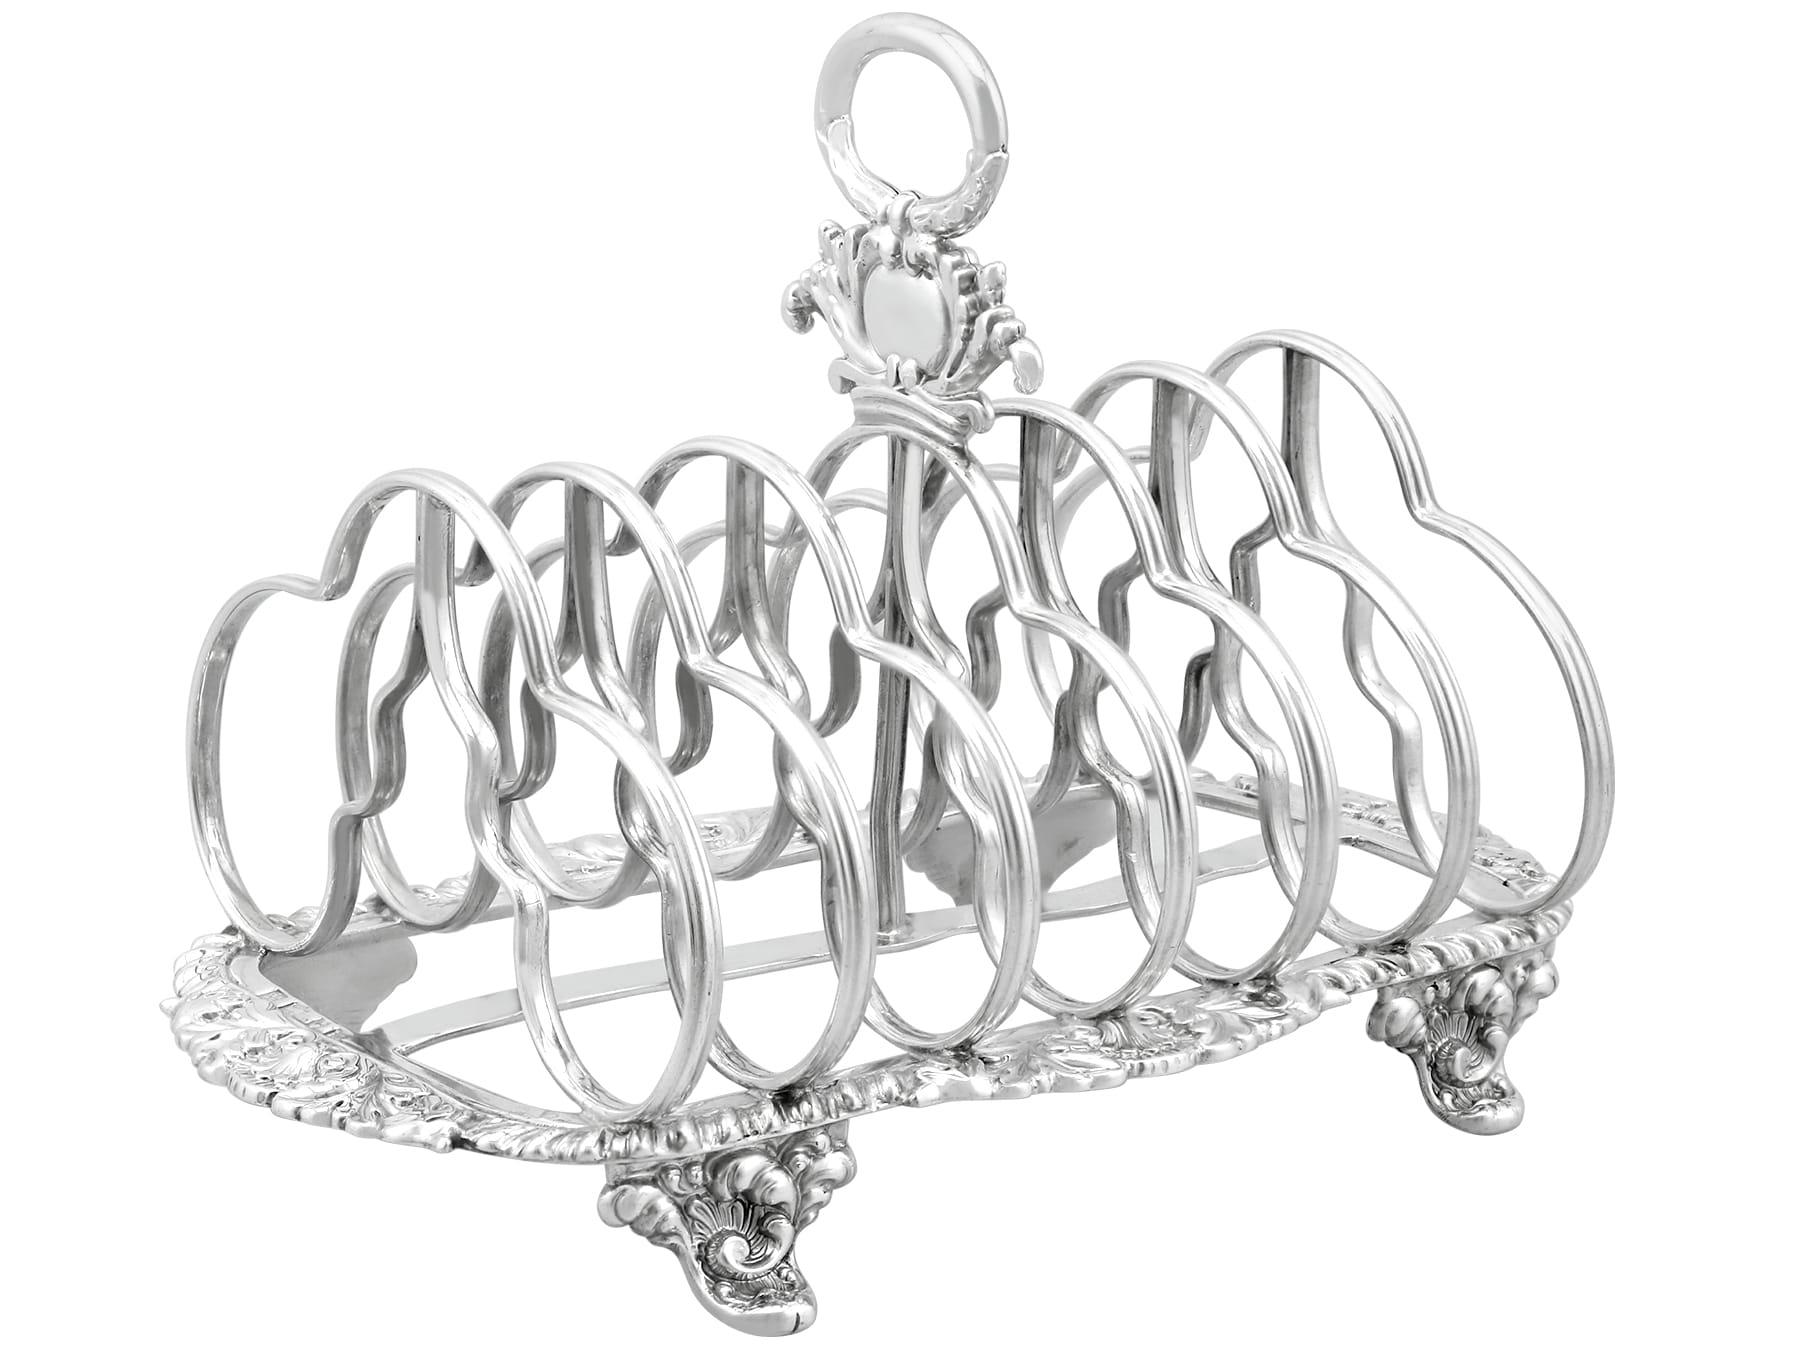 Antique George IV Sterling Silver Toast Rack In Excellent Condition For Sale In Jesmond, Newcastle Upon Tyne